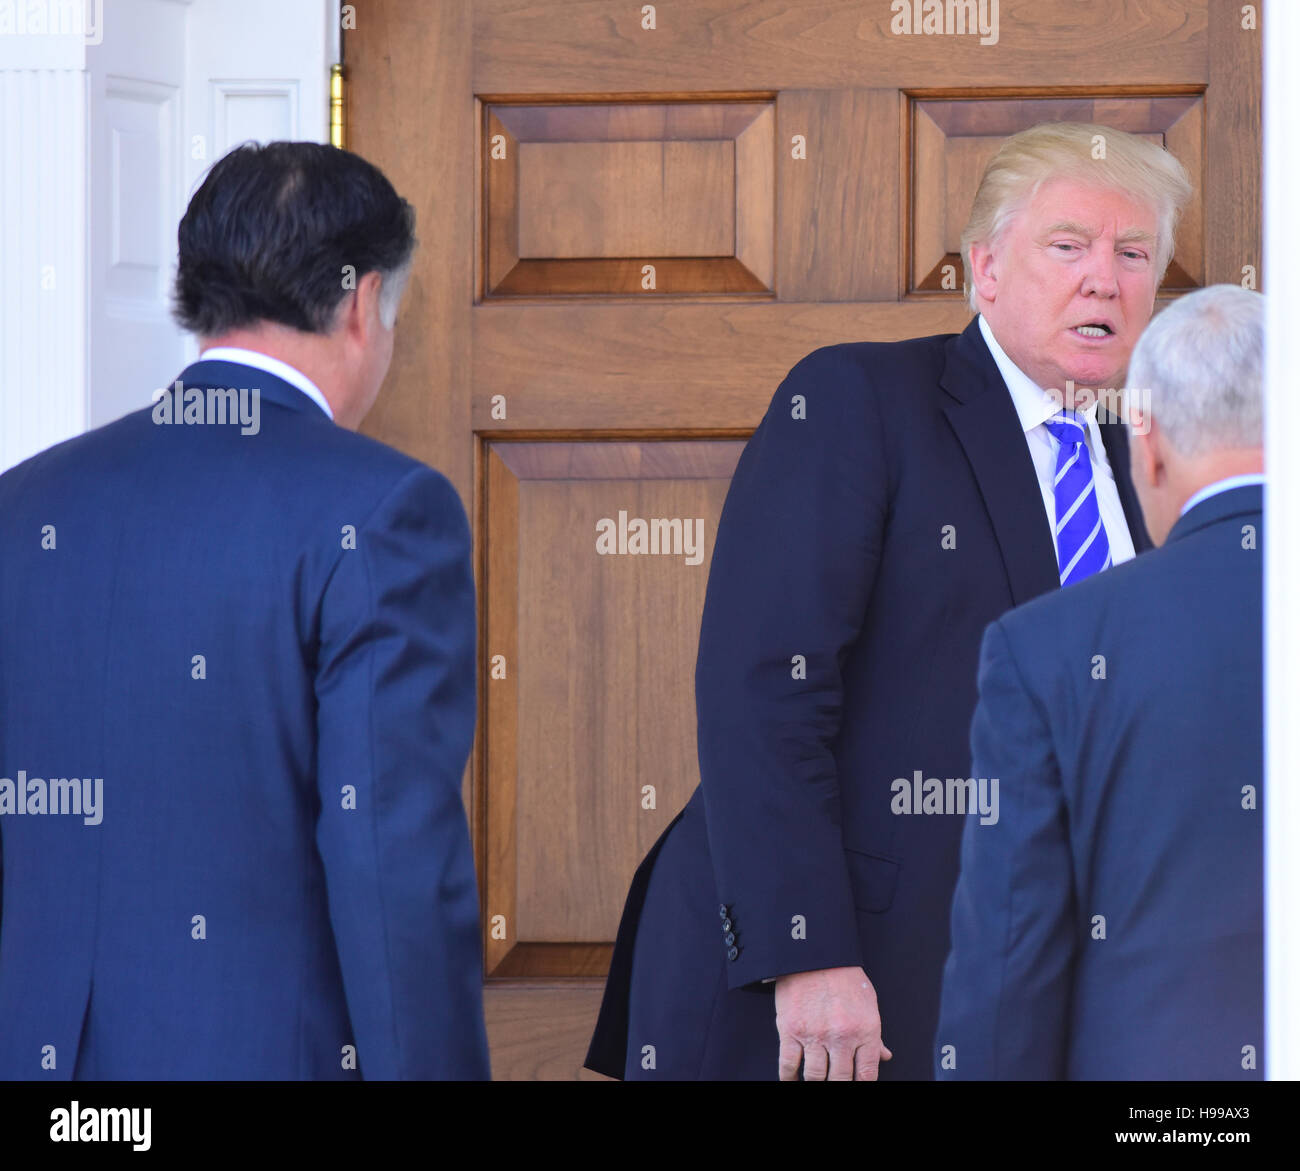 Bedminster, United States. 19th Nov, 2016. President elect Donald Trump and vice president elect Mike Pence greet erstwhile rival & critic, former Massachusetts governor, Mitt Romney after his arrival at Trump's Bedminster, New Jersey country club. Credit:  Andy Katz/Pacific Press/Alamy Live News Stock Photo